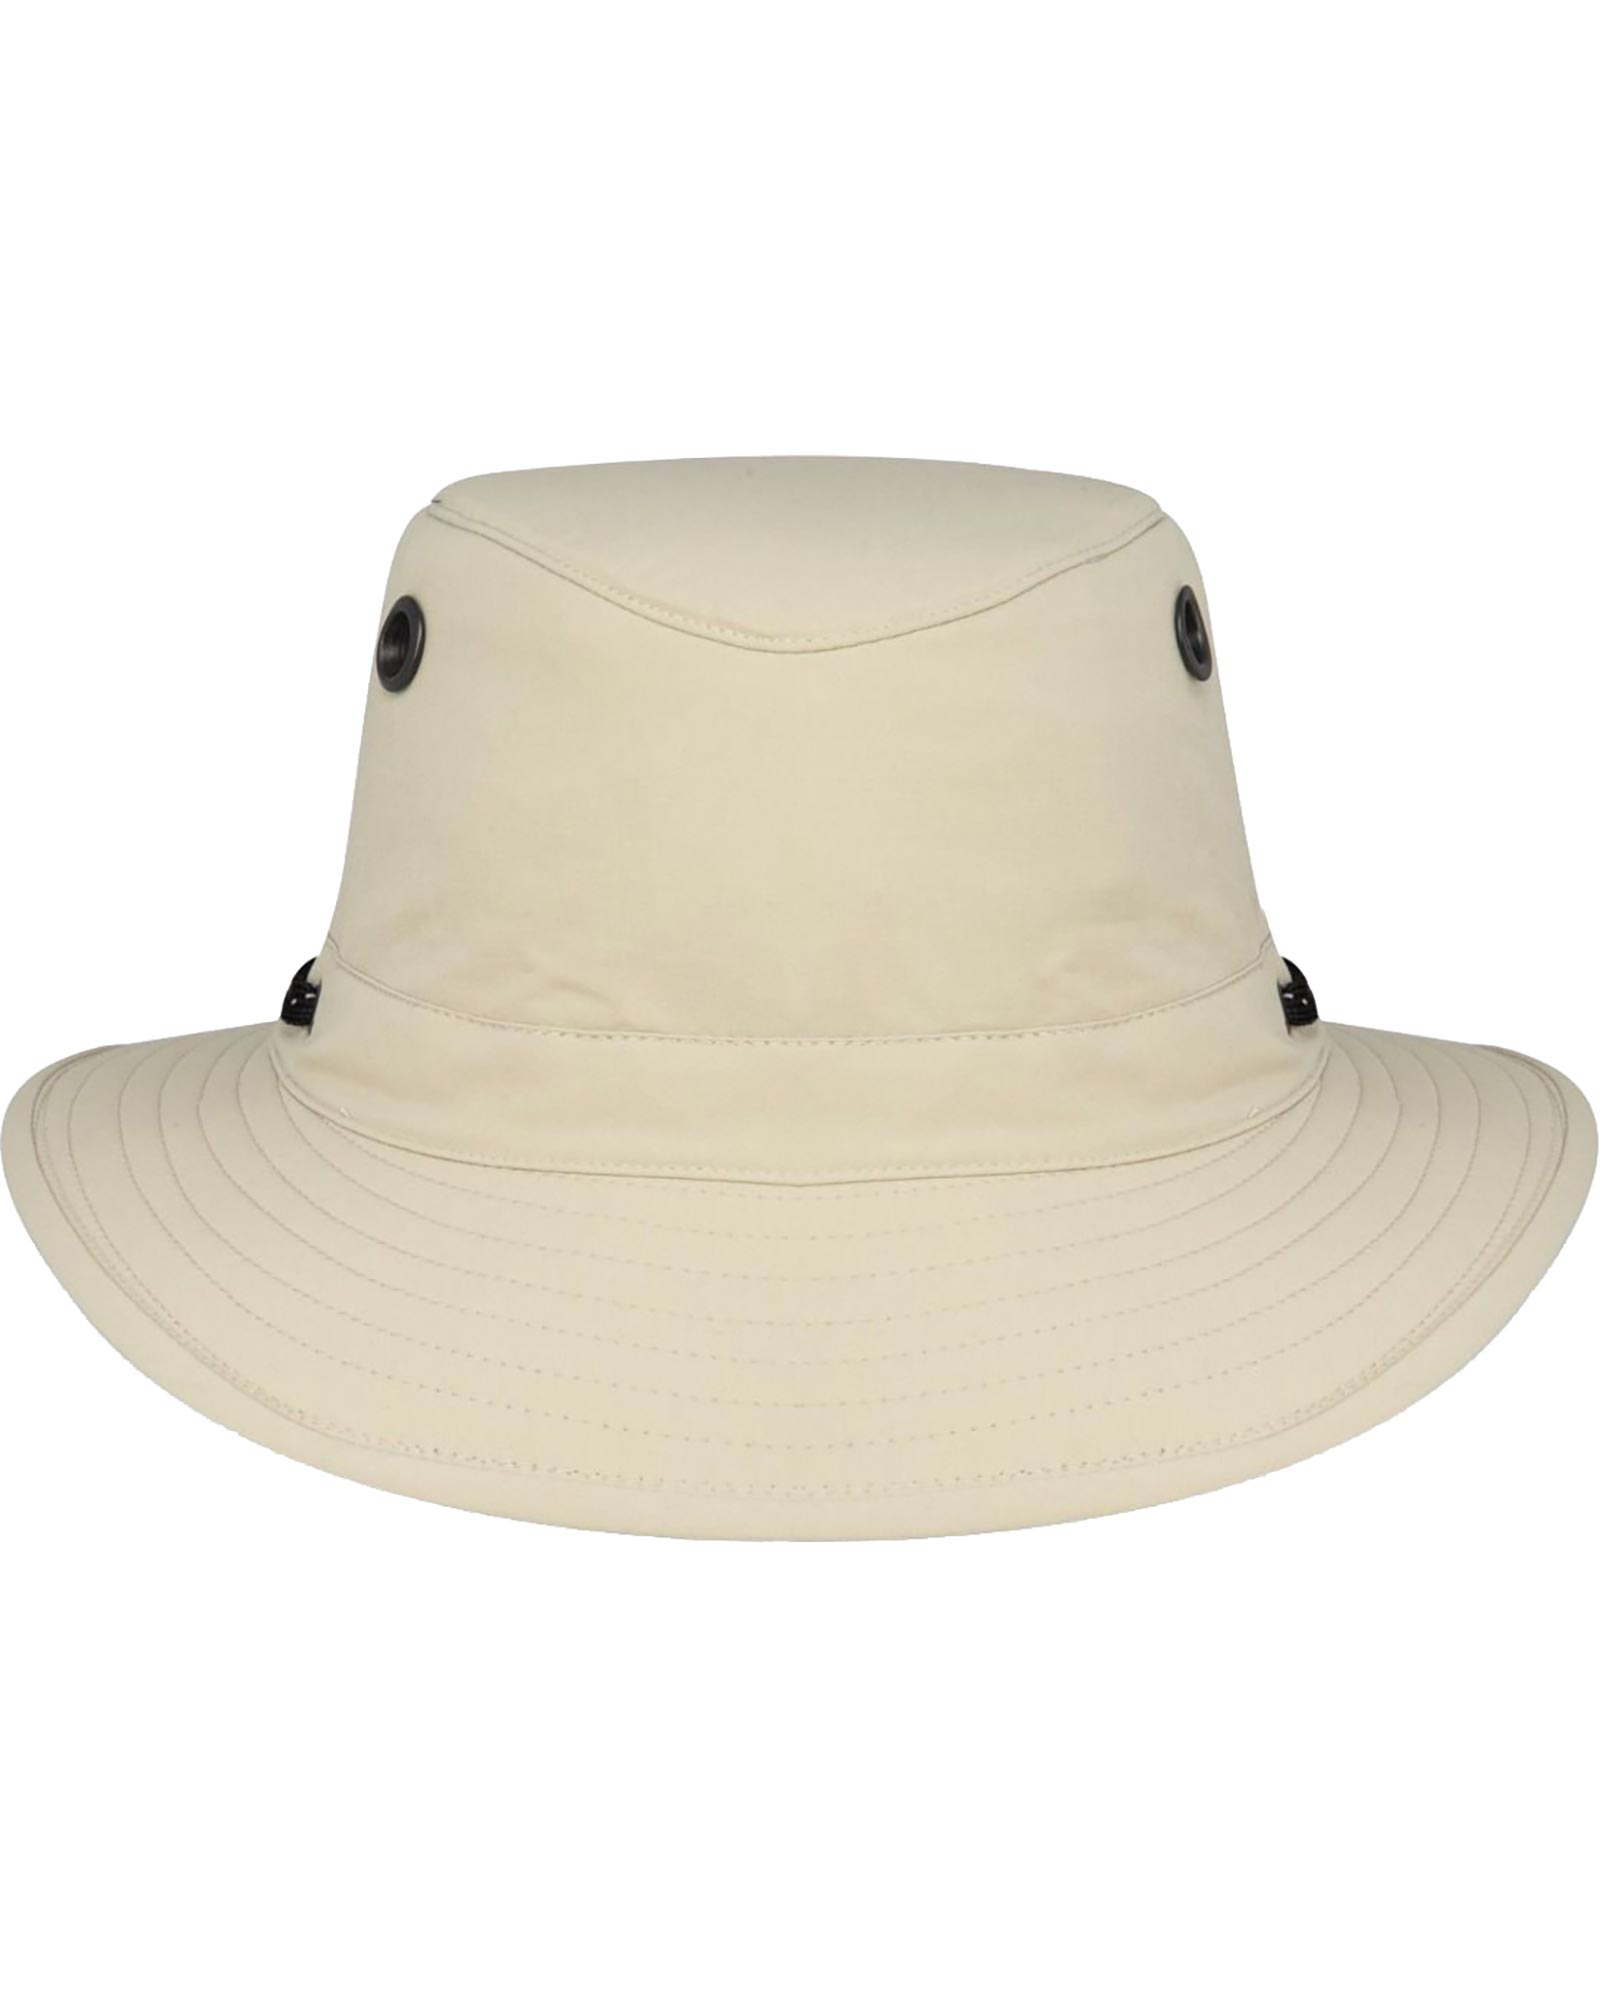 Tilley Breathable Bucket Hat - Stone/Taupe 7 3/4